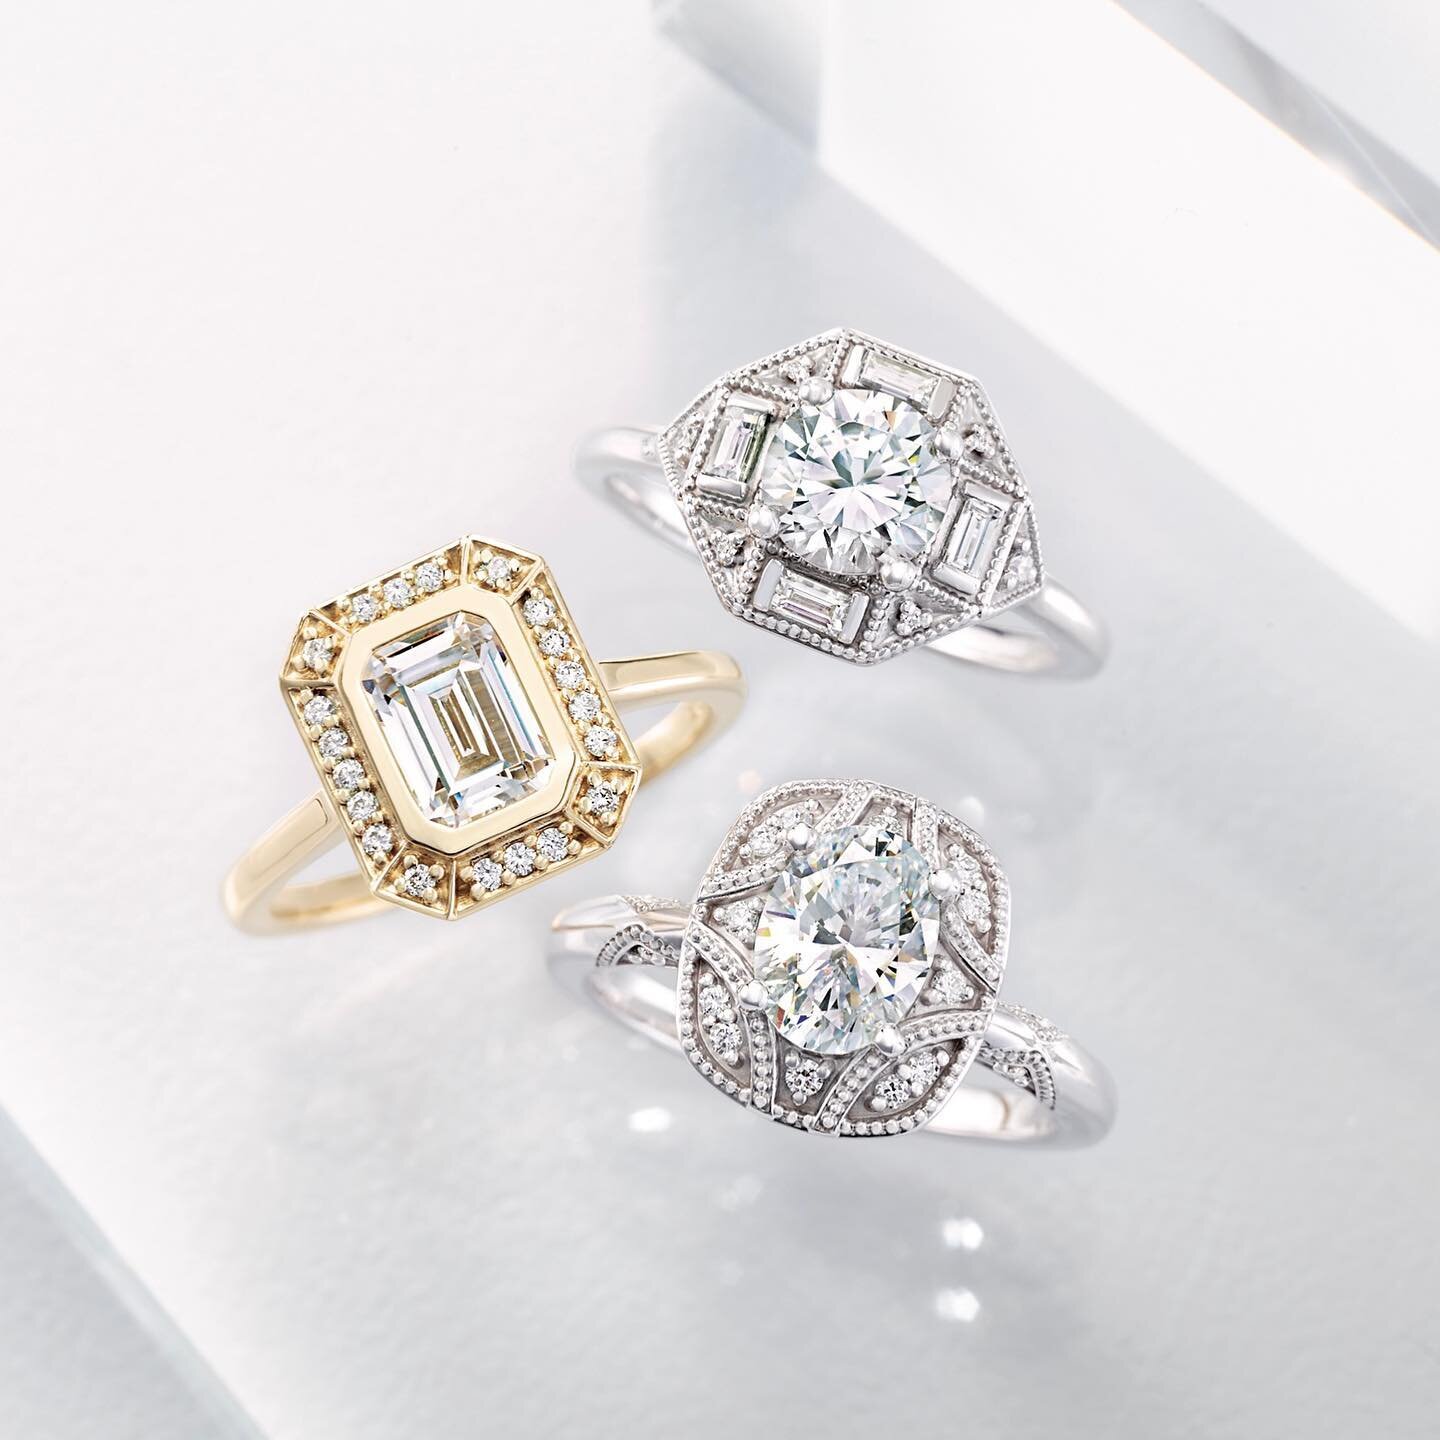 Here&rsquo;s a few of our fully customizable, Antique-inspired Diamond Engagement Rings.✨ Let us create your unique dream ring, with your ideas and input being part of the process, from start to finish! 💍 Set up an in-store appointment or just DM to